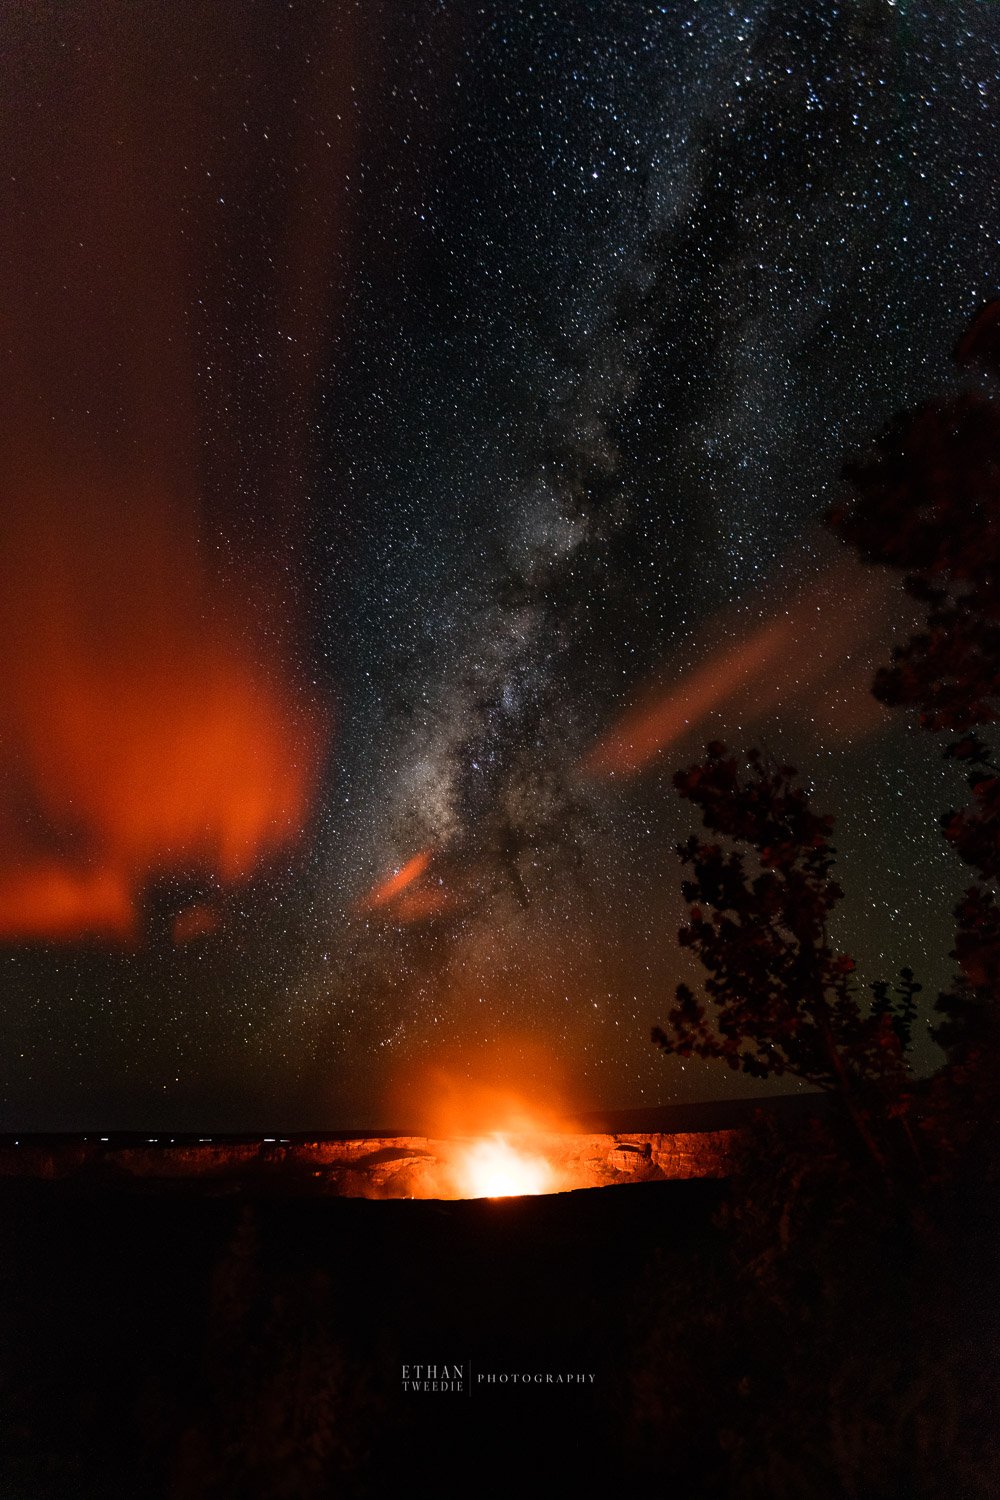  IMAGE 3- Taken around 11:30pm as some clouds drifted past glowing from the Lava Lake  Lava Lake | Kilauea Volcano | Hawaii Volcanoes National Park 